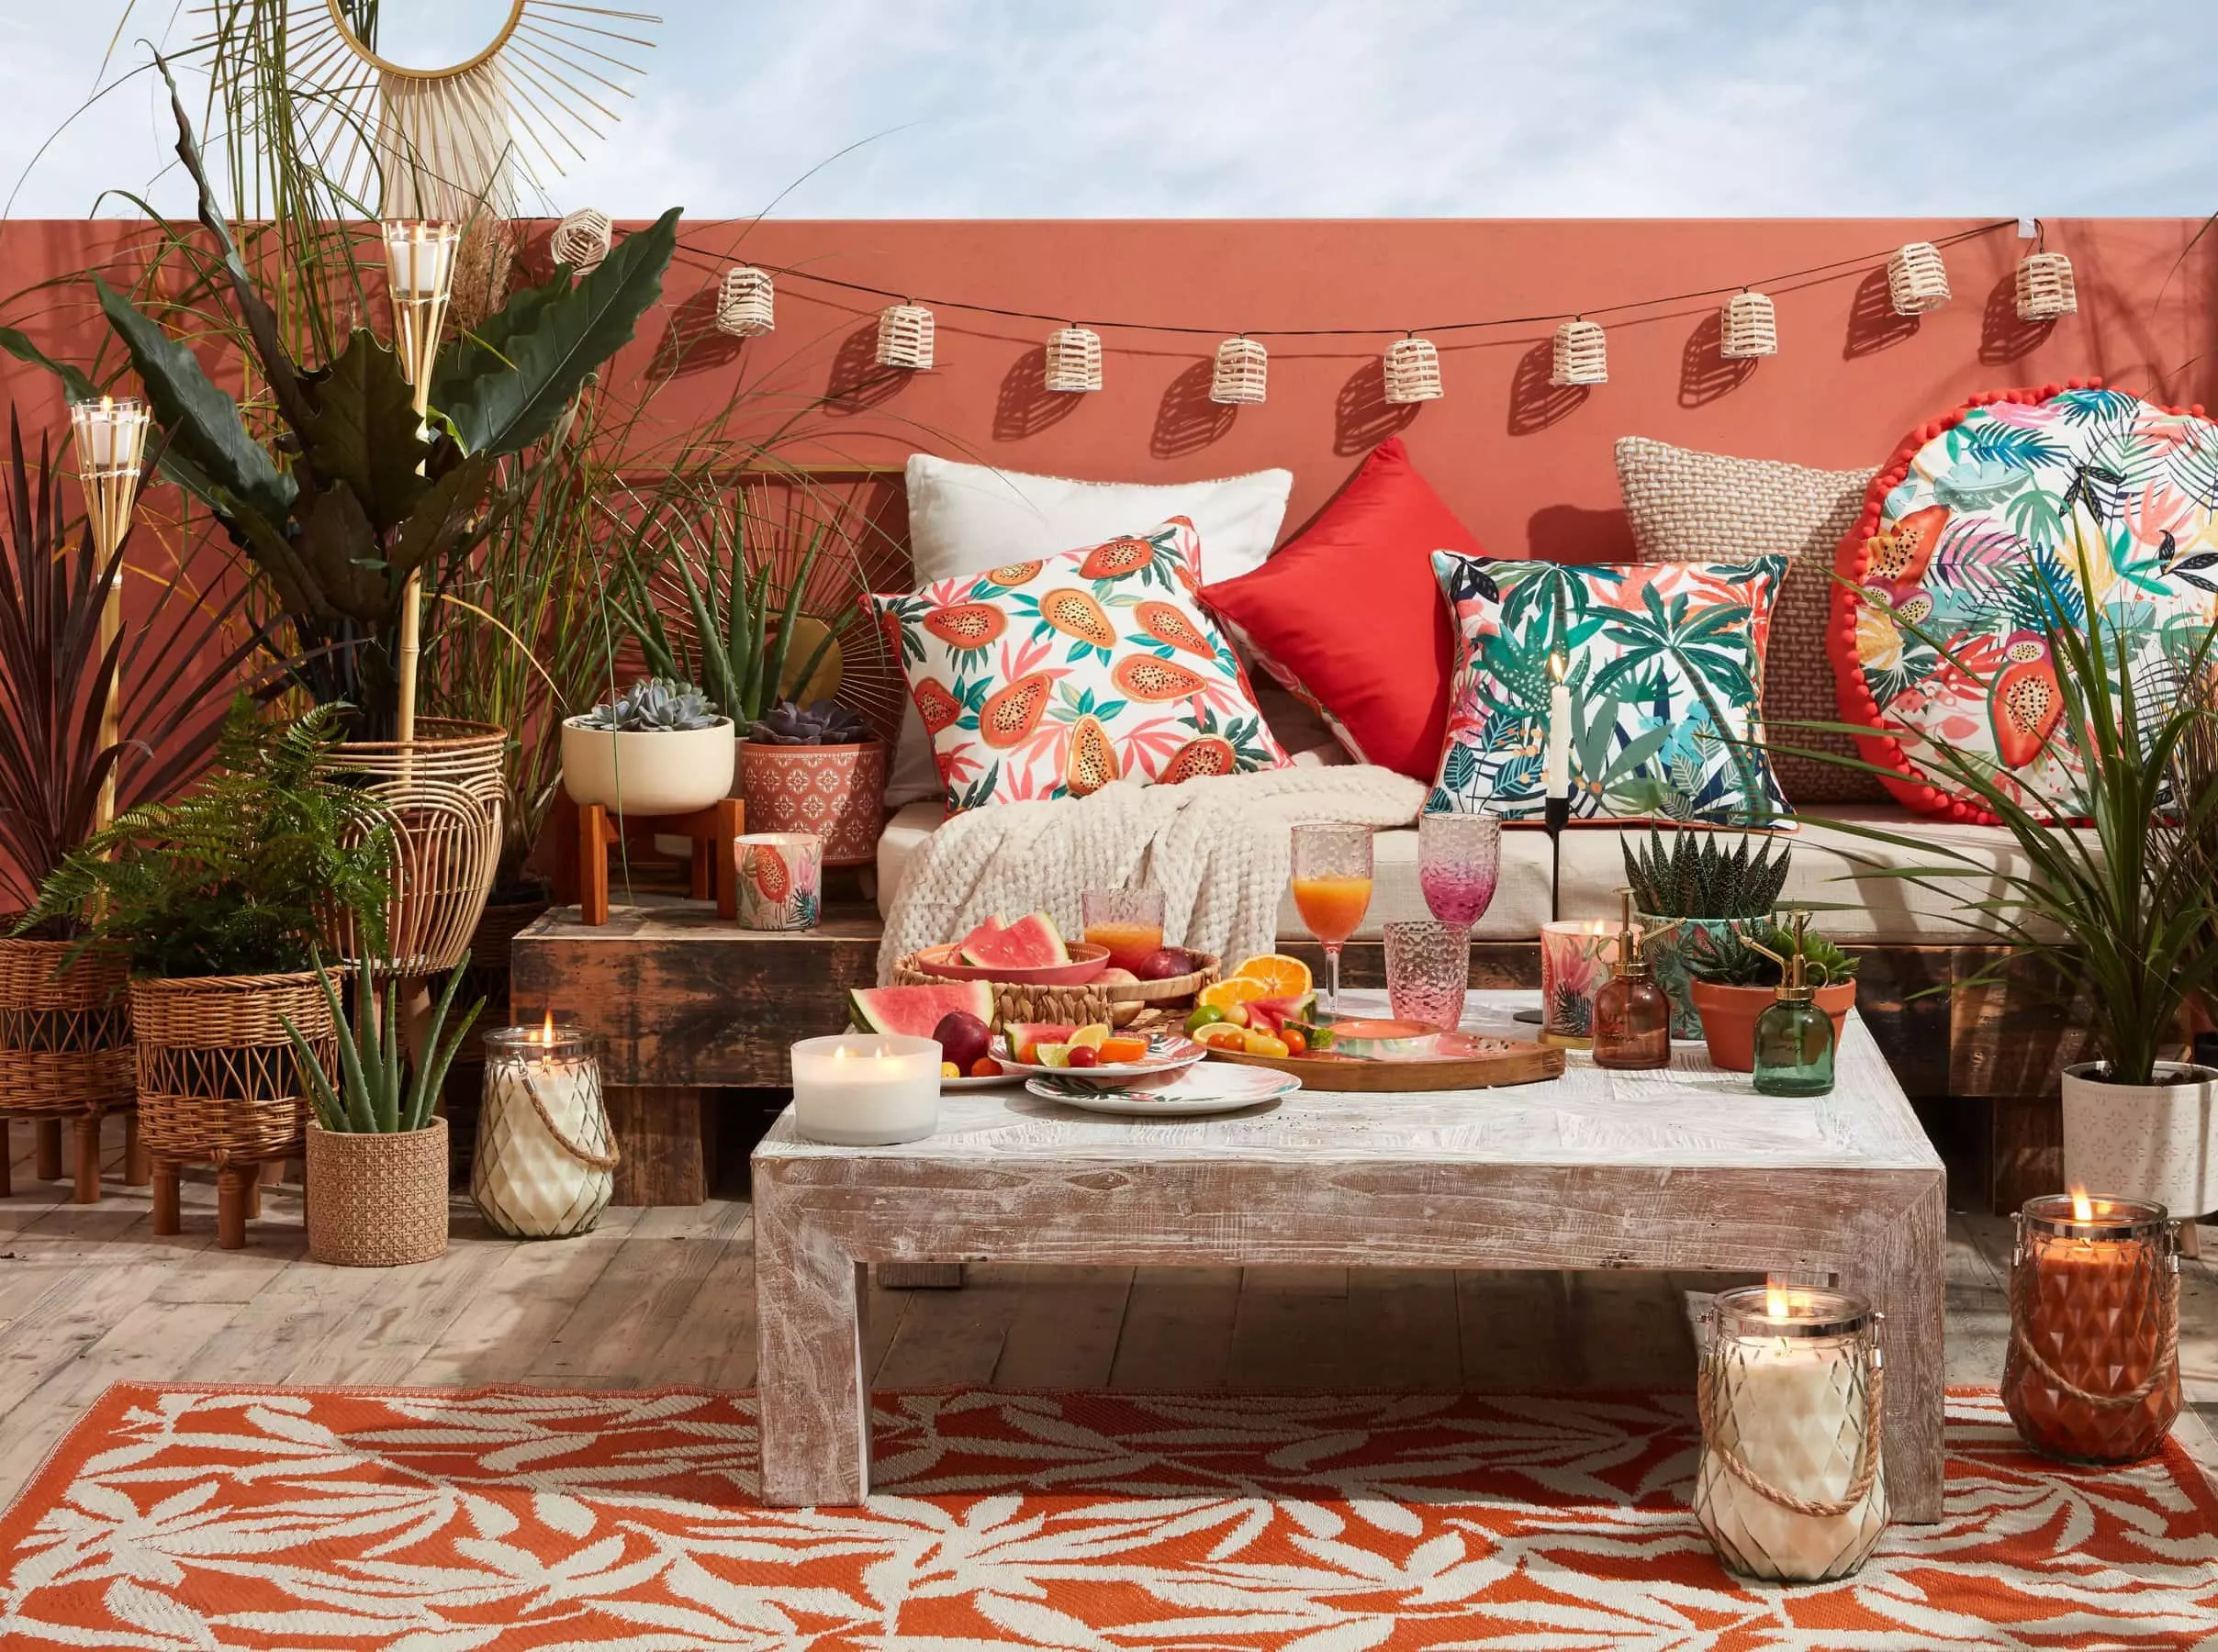 Orange painted garden wall with orange and white patterned outdoor rug. Chunky garden table, brightly colored cushions, and lots of plants